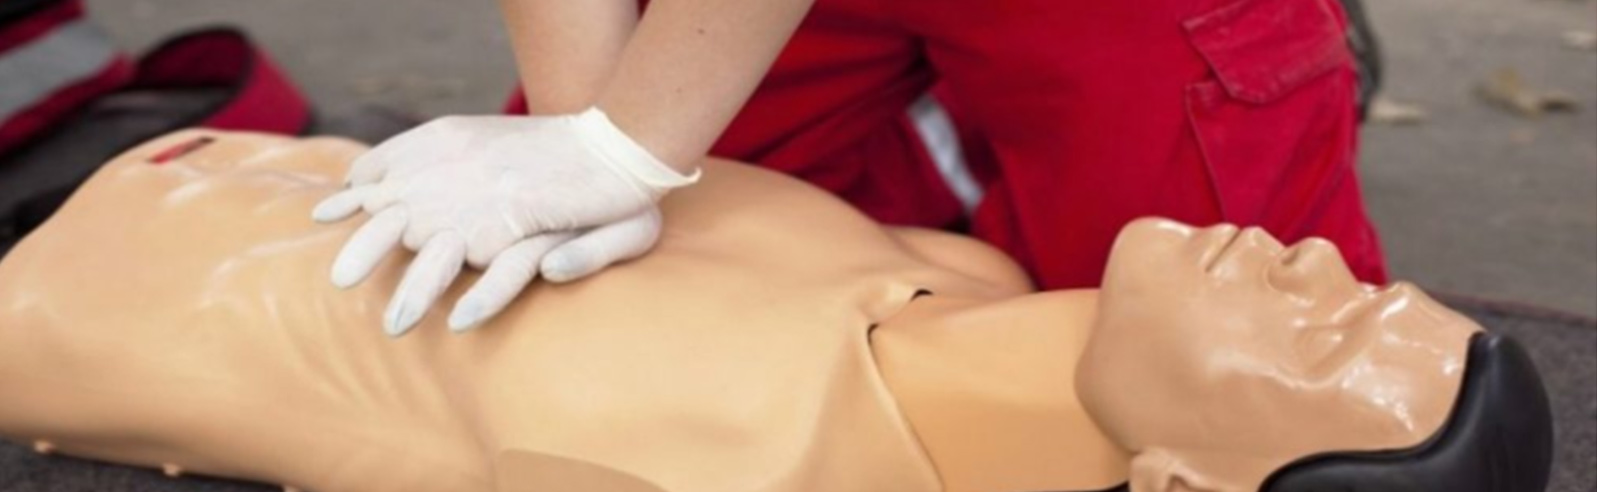 CPR Training Courses to Fit Your Needs and Profession